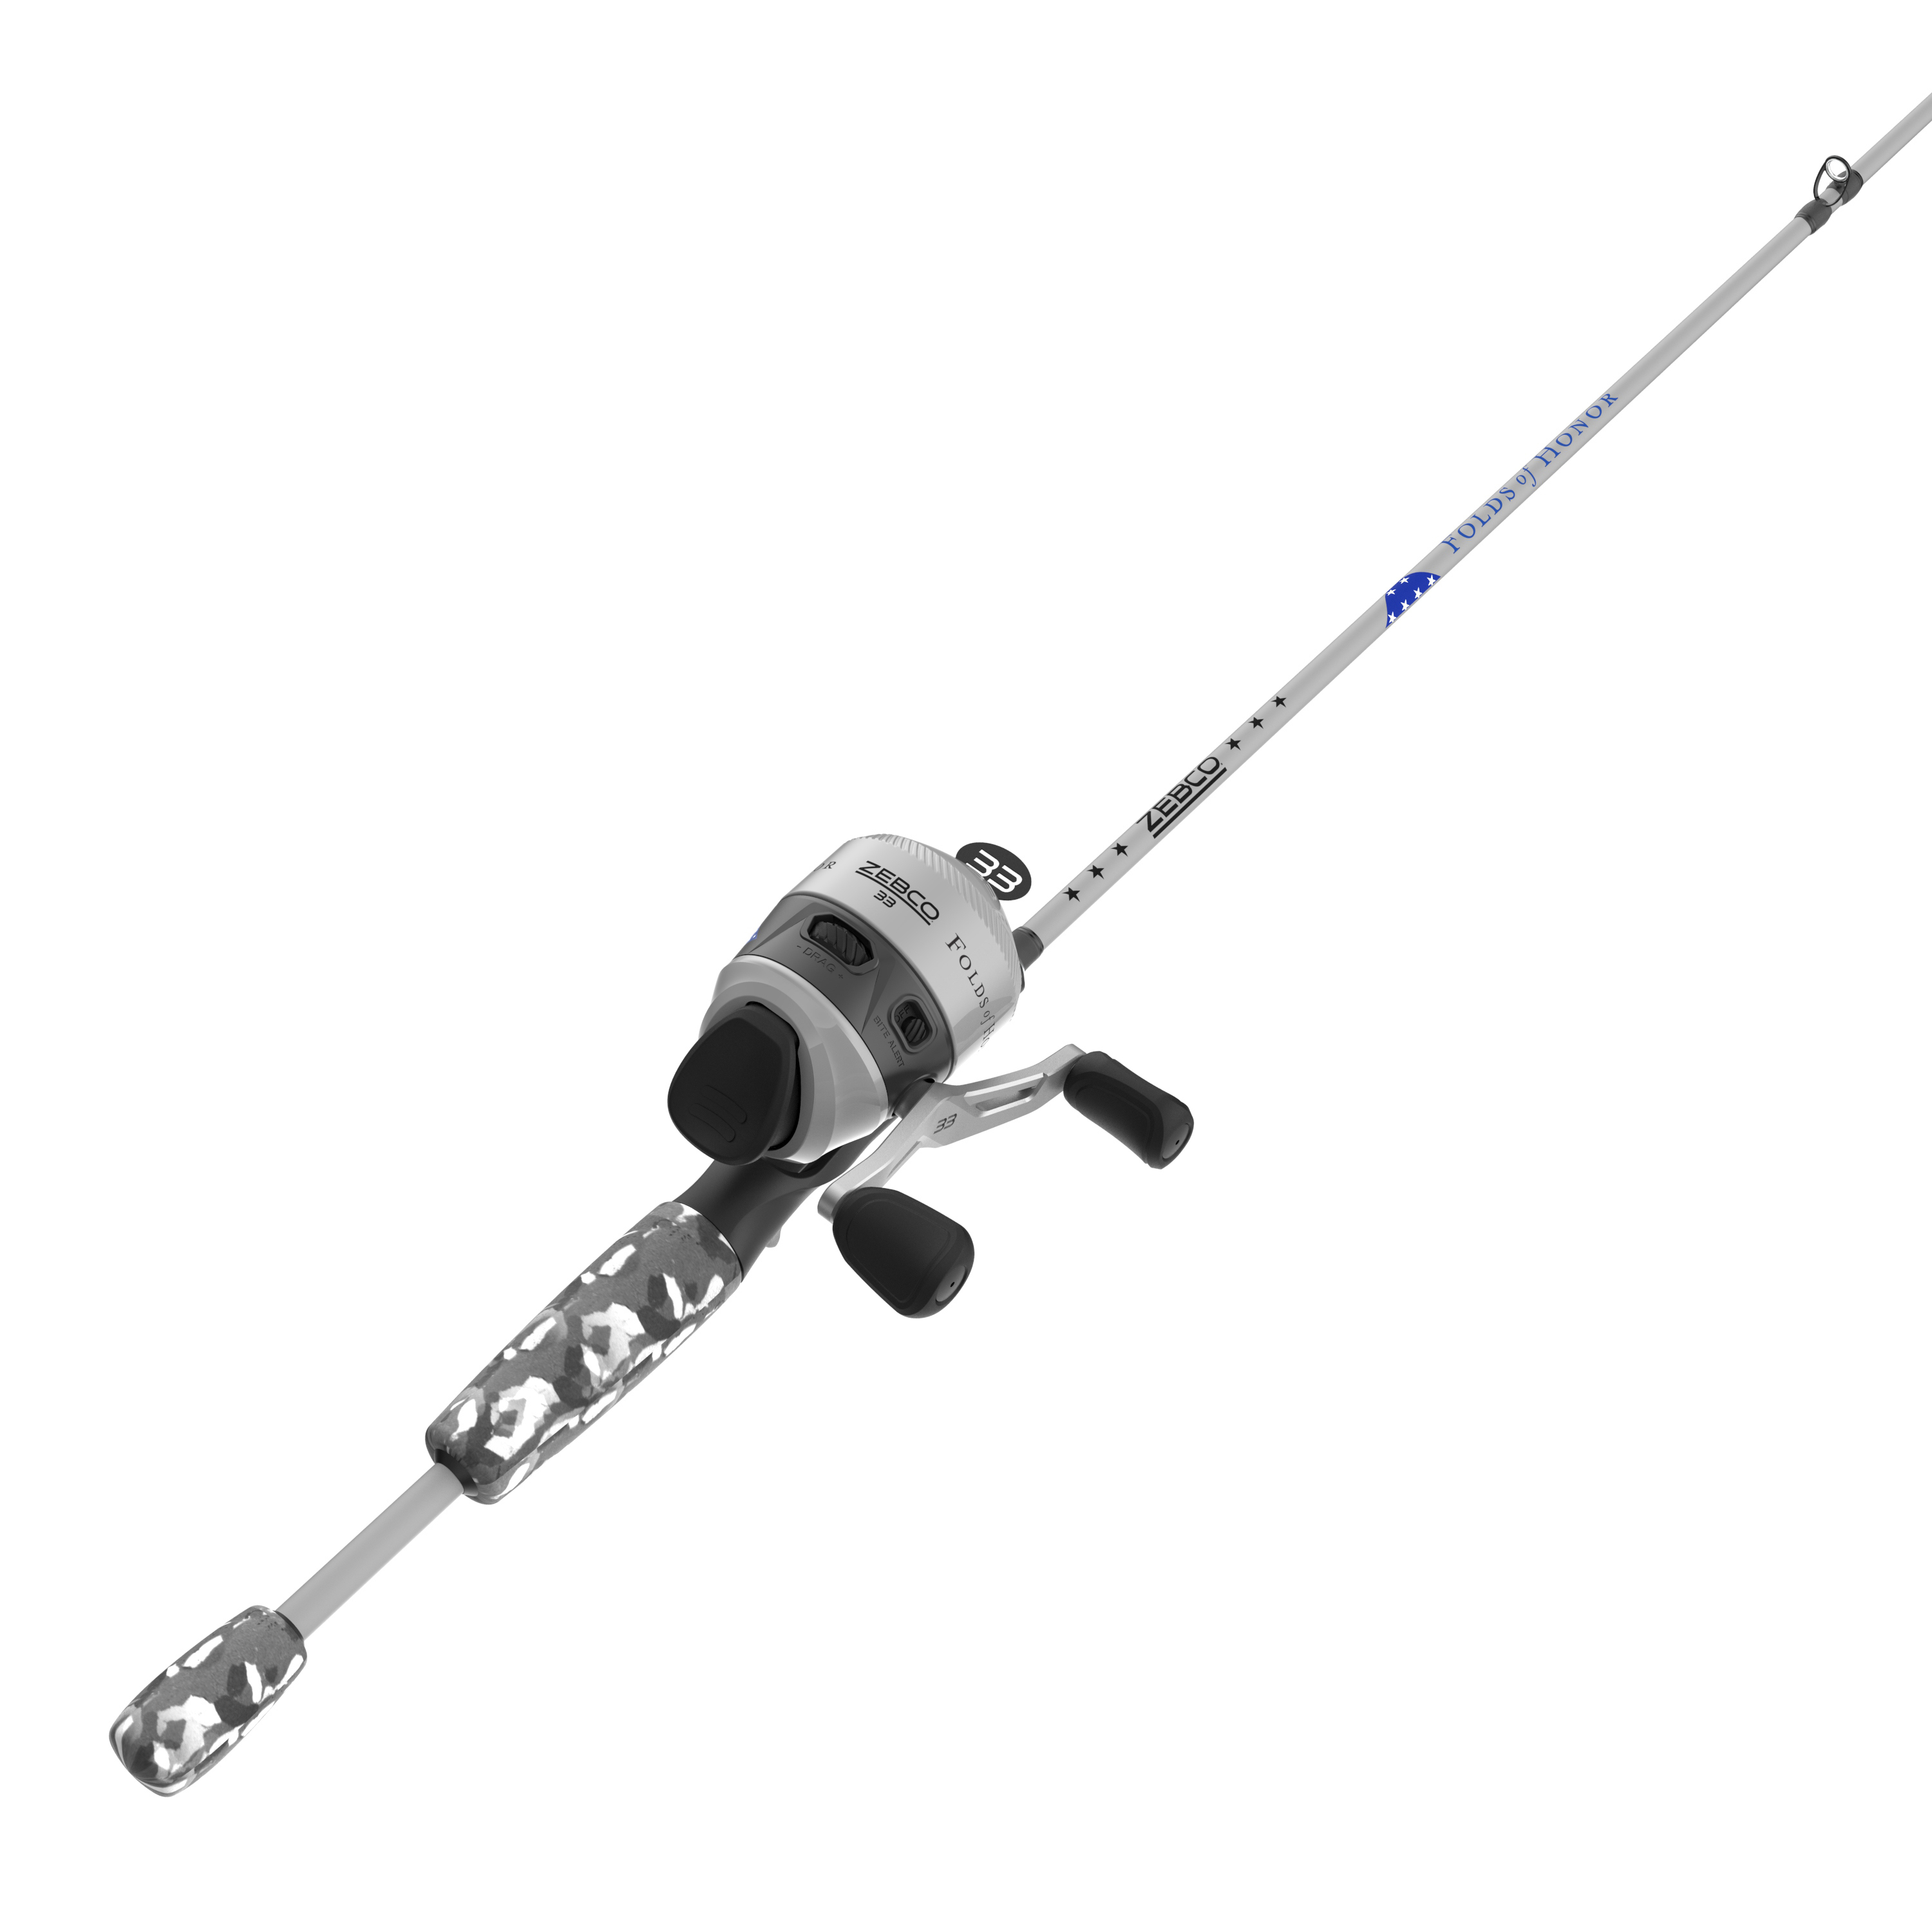 Zebco Quantum XT6 Fishing Spinning Reel - La Paz County Sheriff's Office  Dedicated to Service